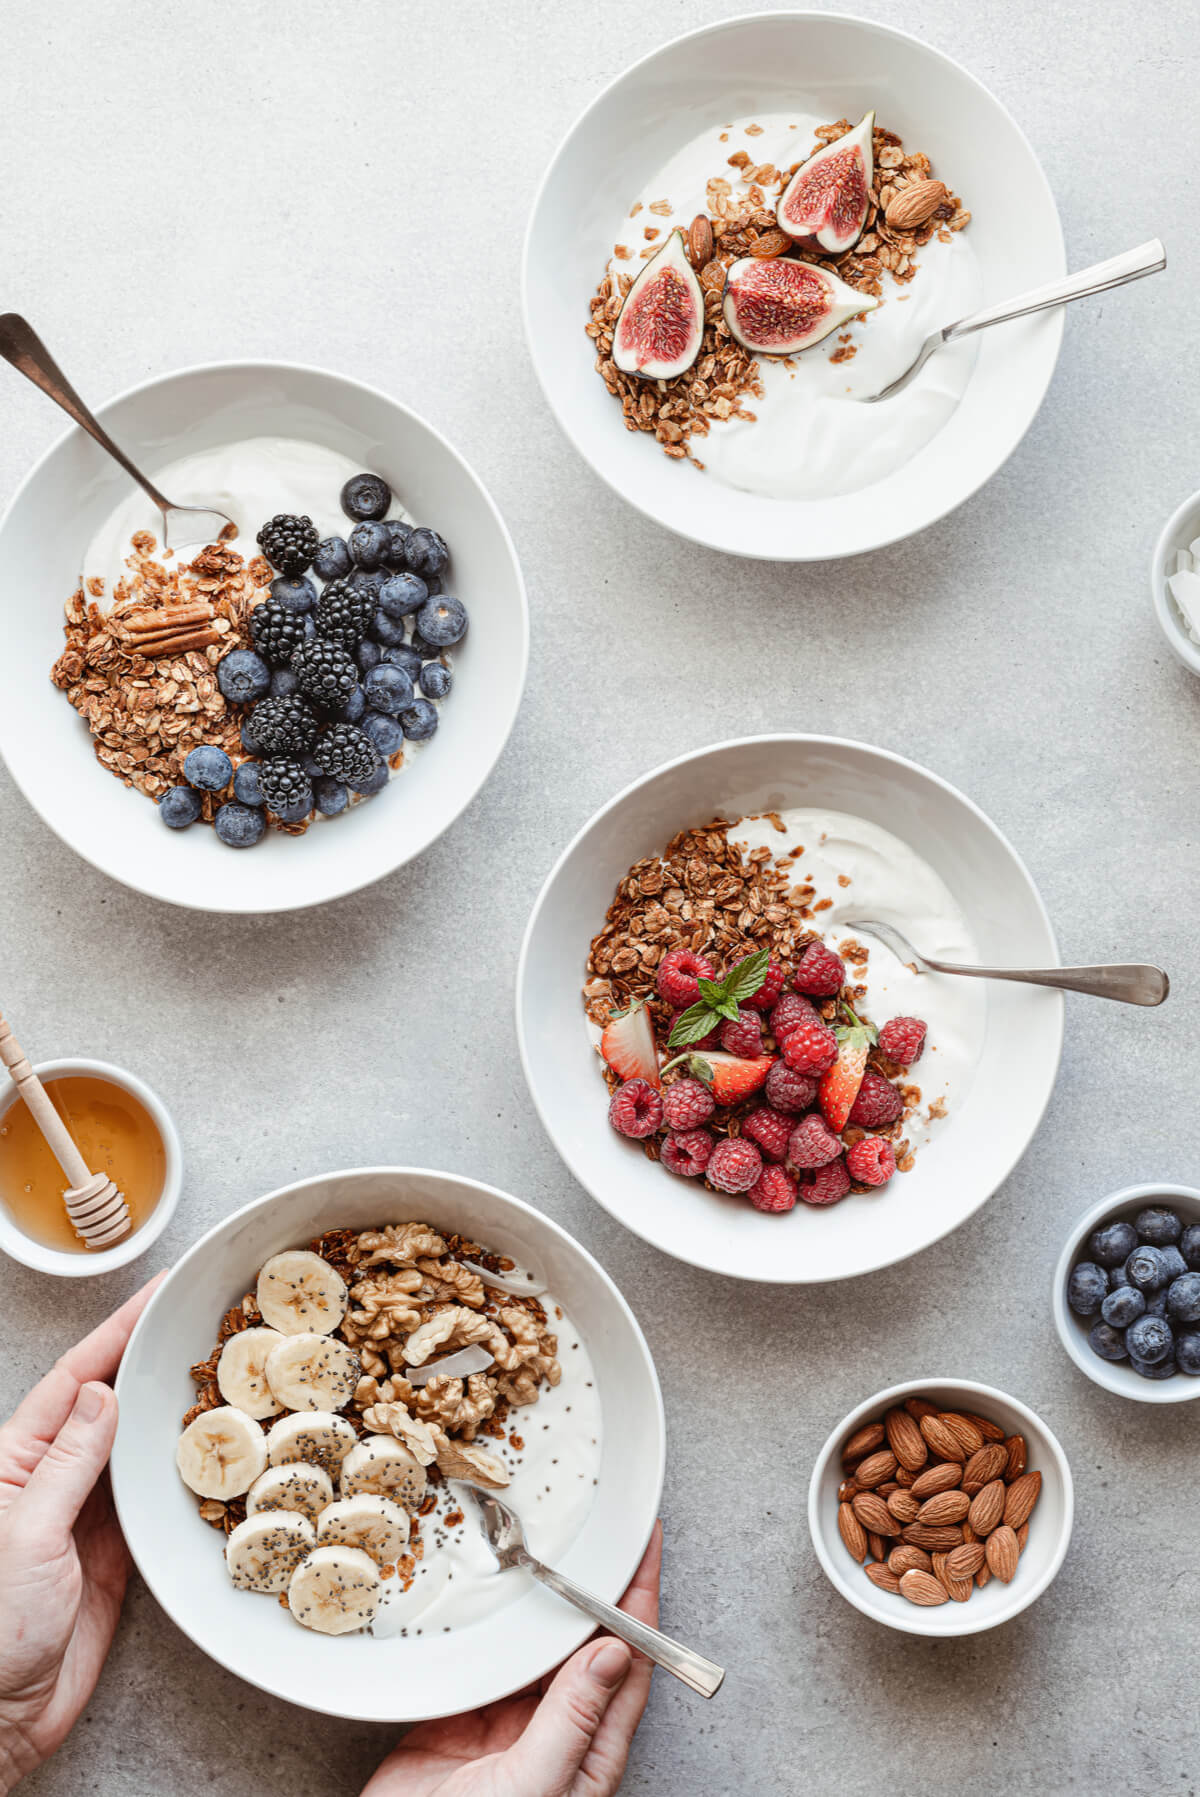 Four bowls filled with yogurt, granola, and berries, bananas, and figs. A healthy breakfast idea. 